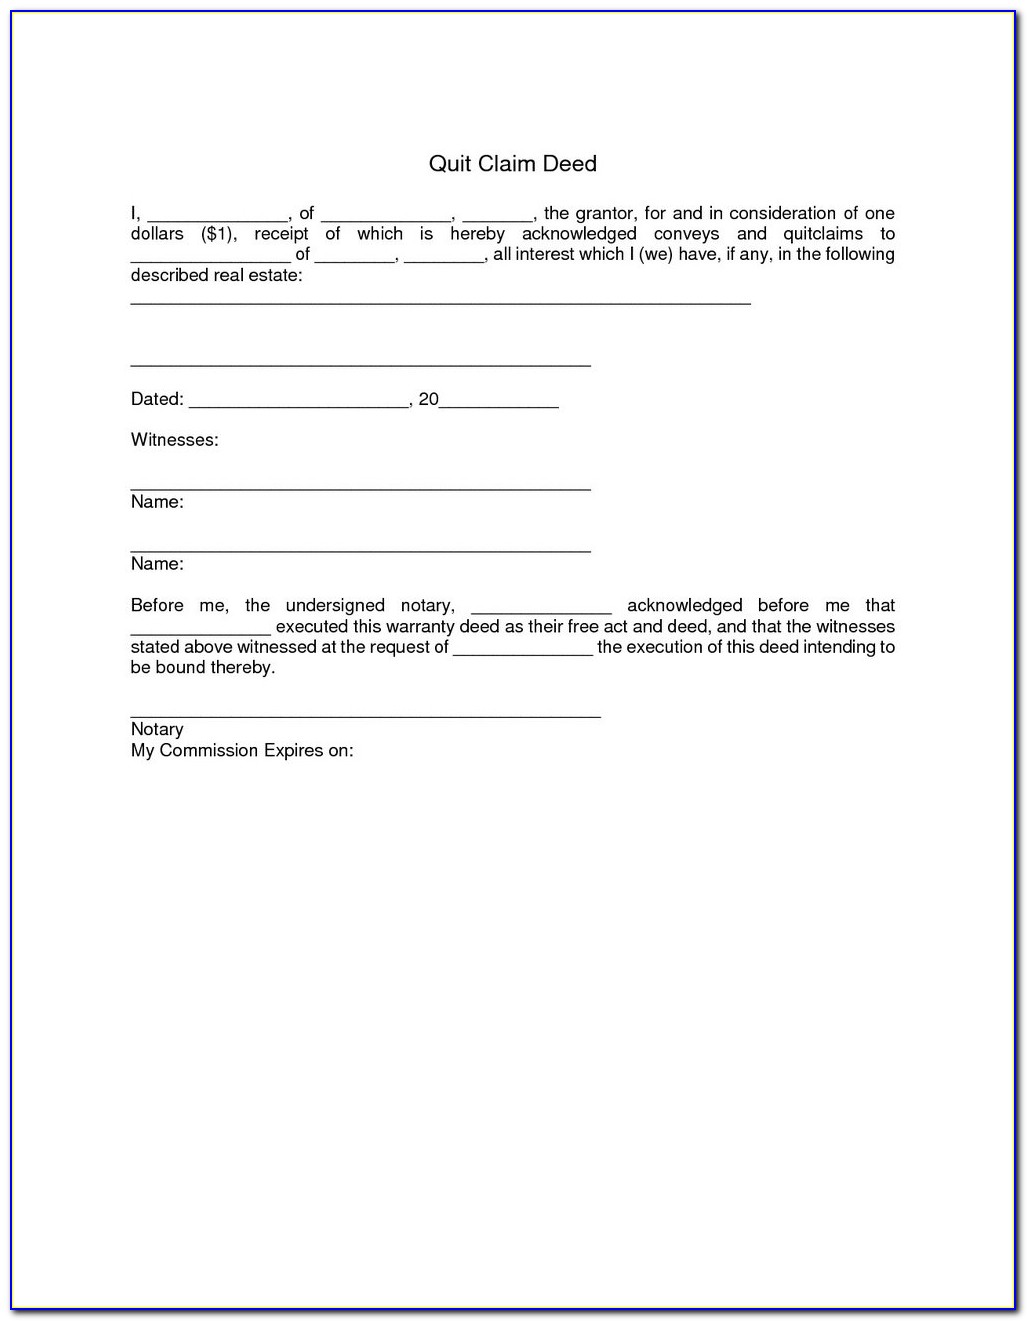 Blank Quit Claim Deed Form Texas